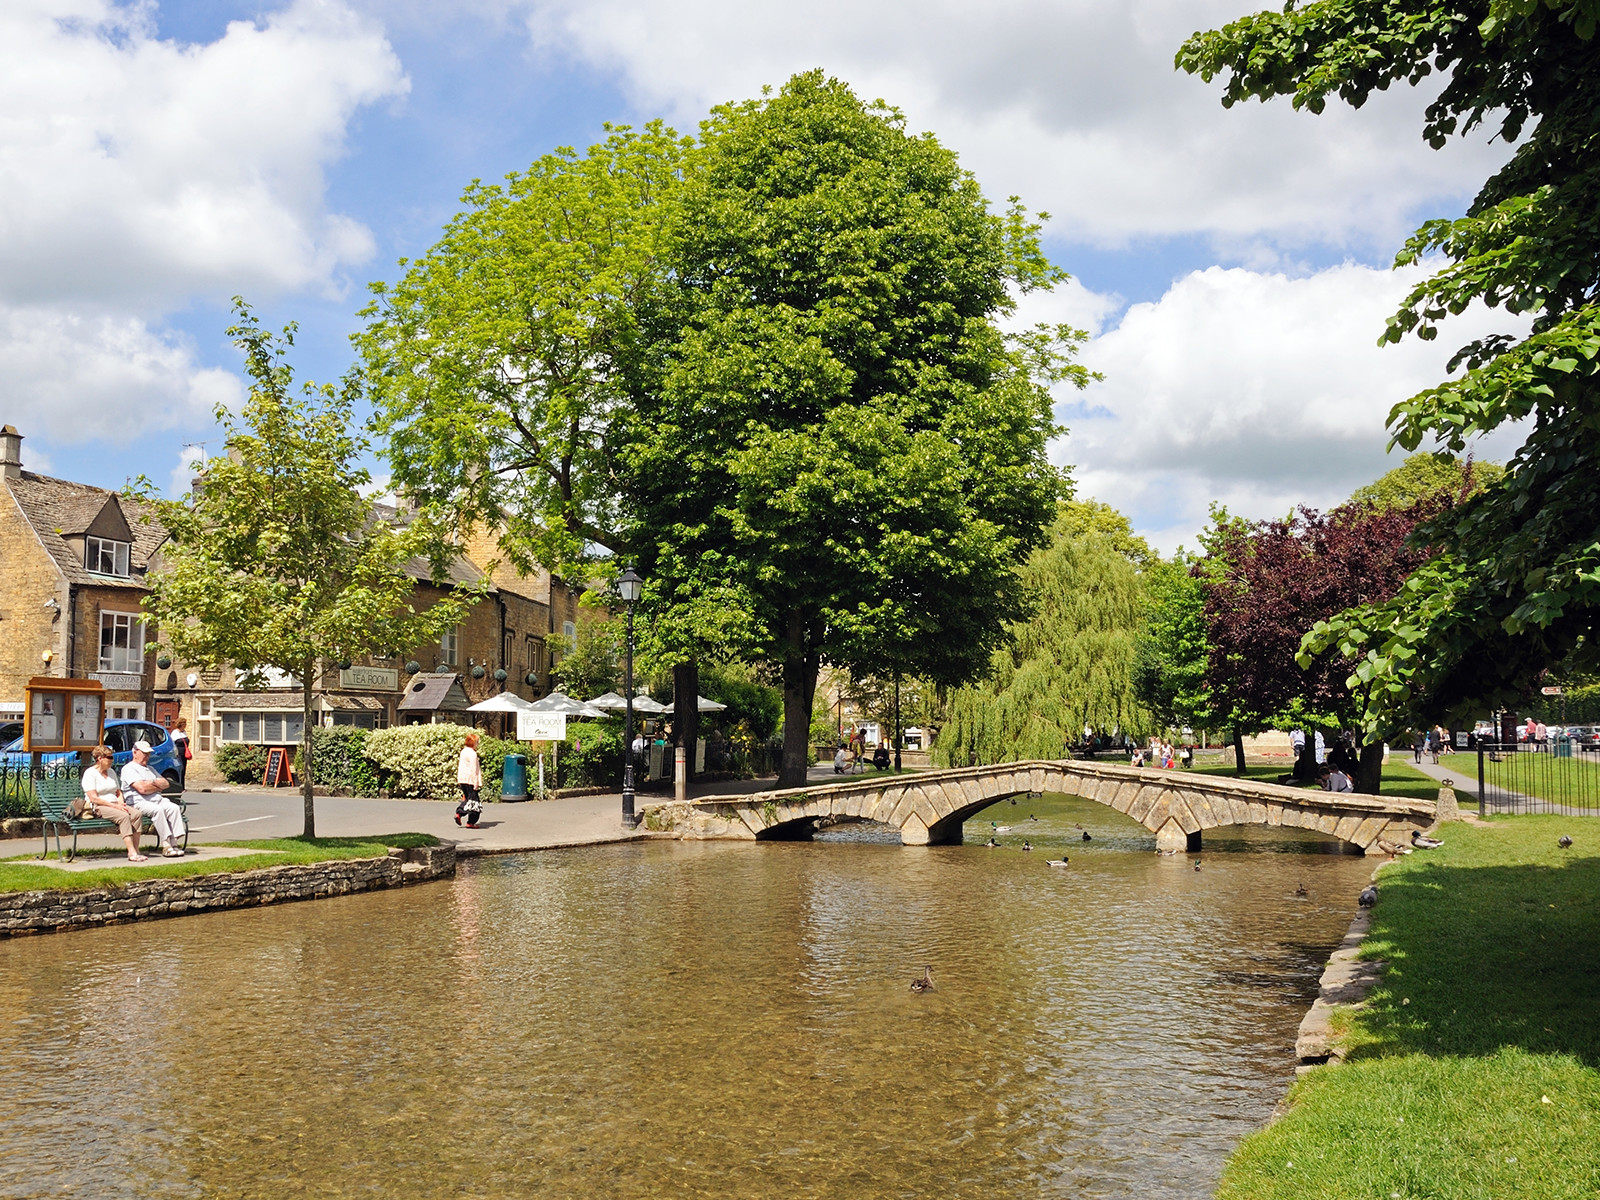 Visit Bourton on the Water from Evenlode Grounds Farm